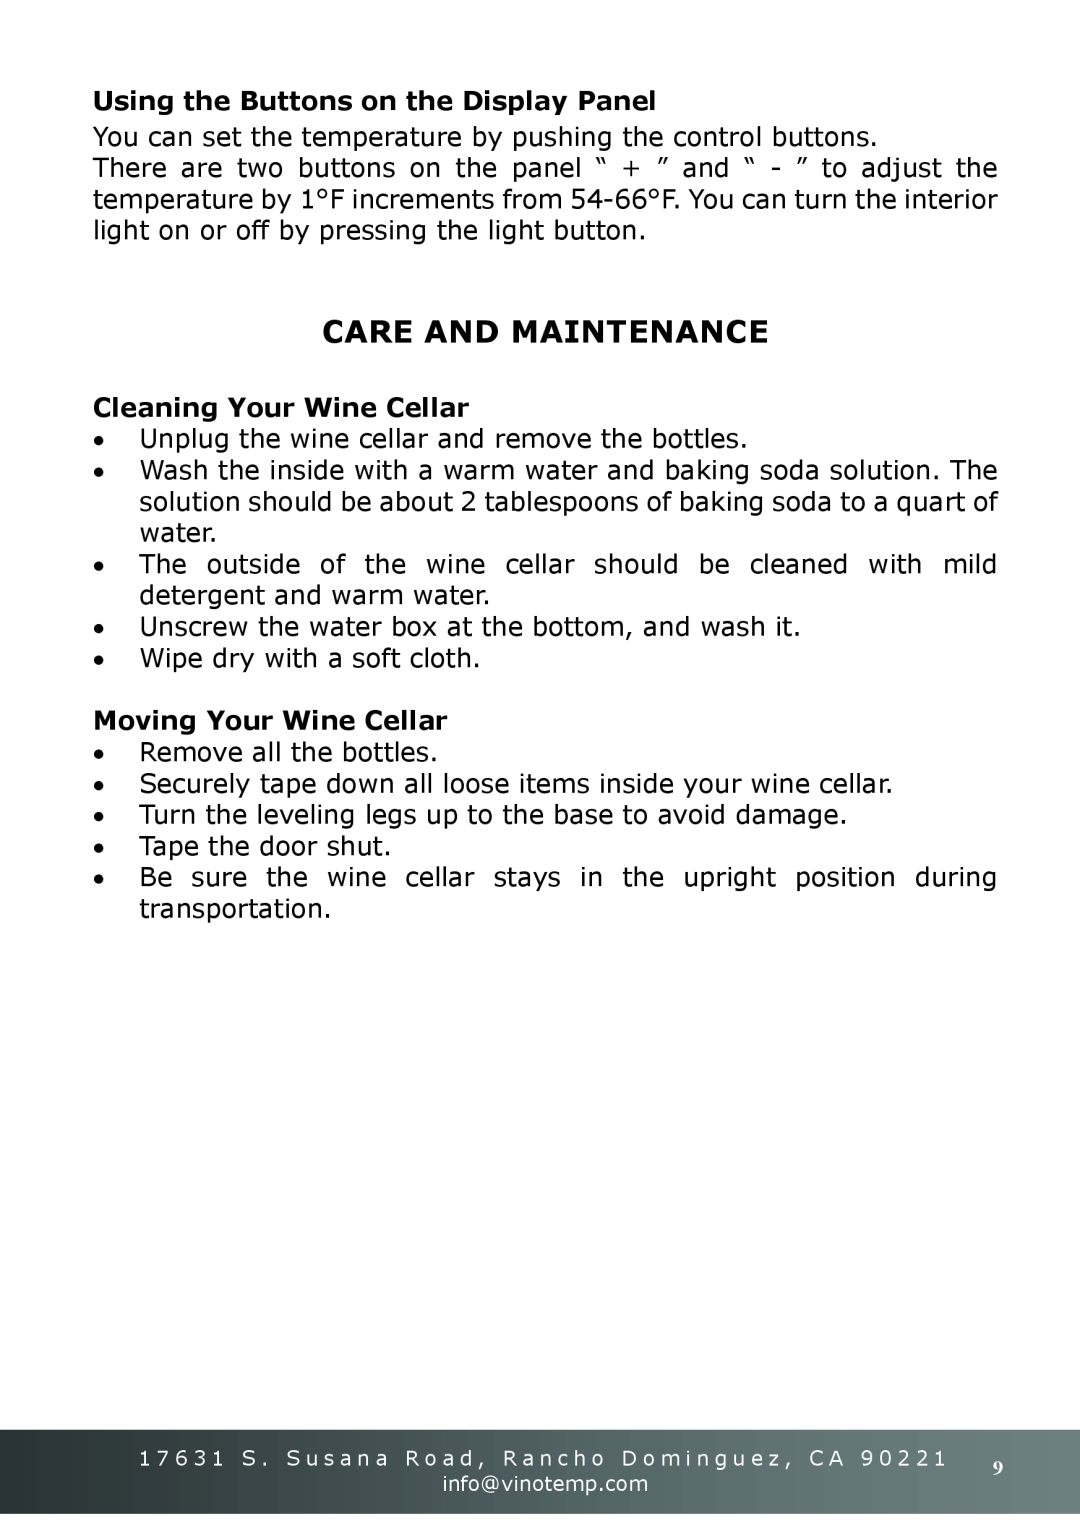 Vinotemp VT-16TEDS owner manual Care And Maintenance, Using the Buttons on the Display Panel, Cleaning Your Wine Cellar 